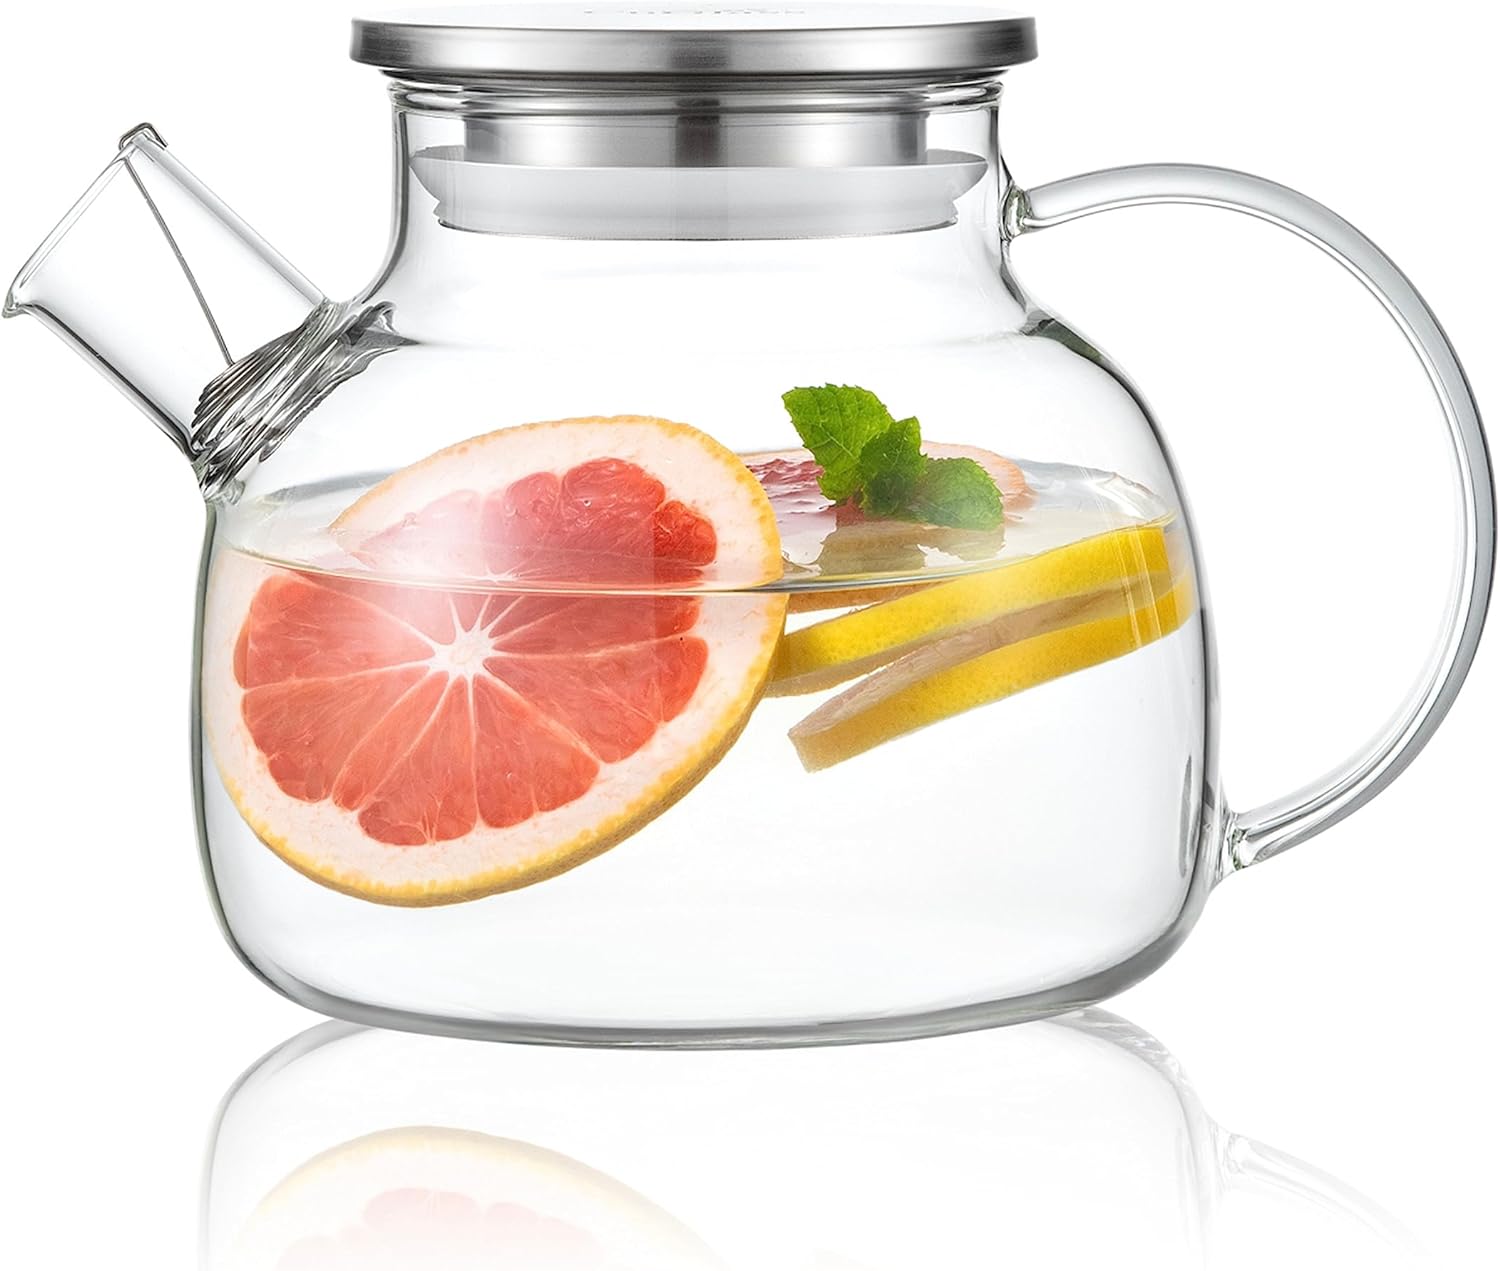 CnGlass Glass Teapot 900ml Stove Safe with Stainless Steel Lid, Clear Teapot with Removable Infuser, Loose Leaf Teapot and Blooming Tea